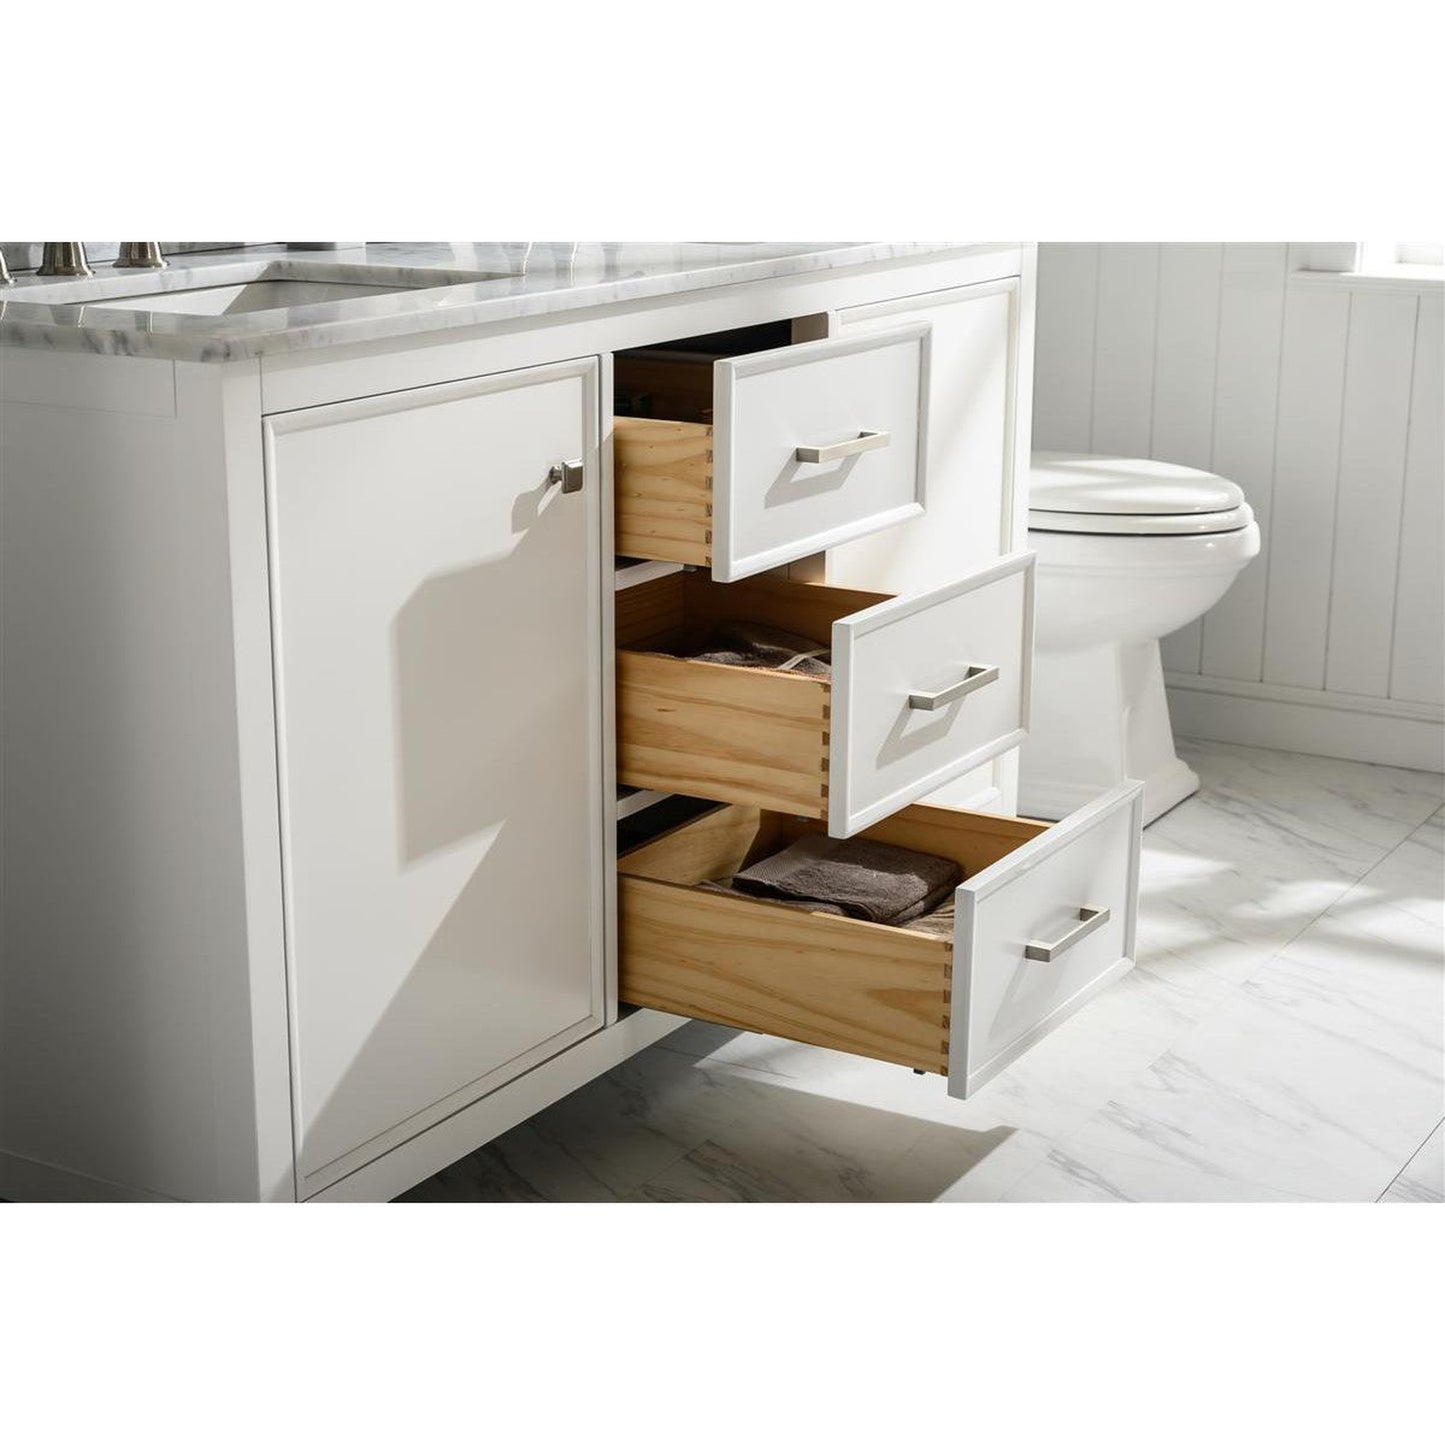 Legion Furniture WLF2154 54" White Freestanding Vanity With White Carrara Marble Top and Double White Ceramic Sink